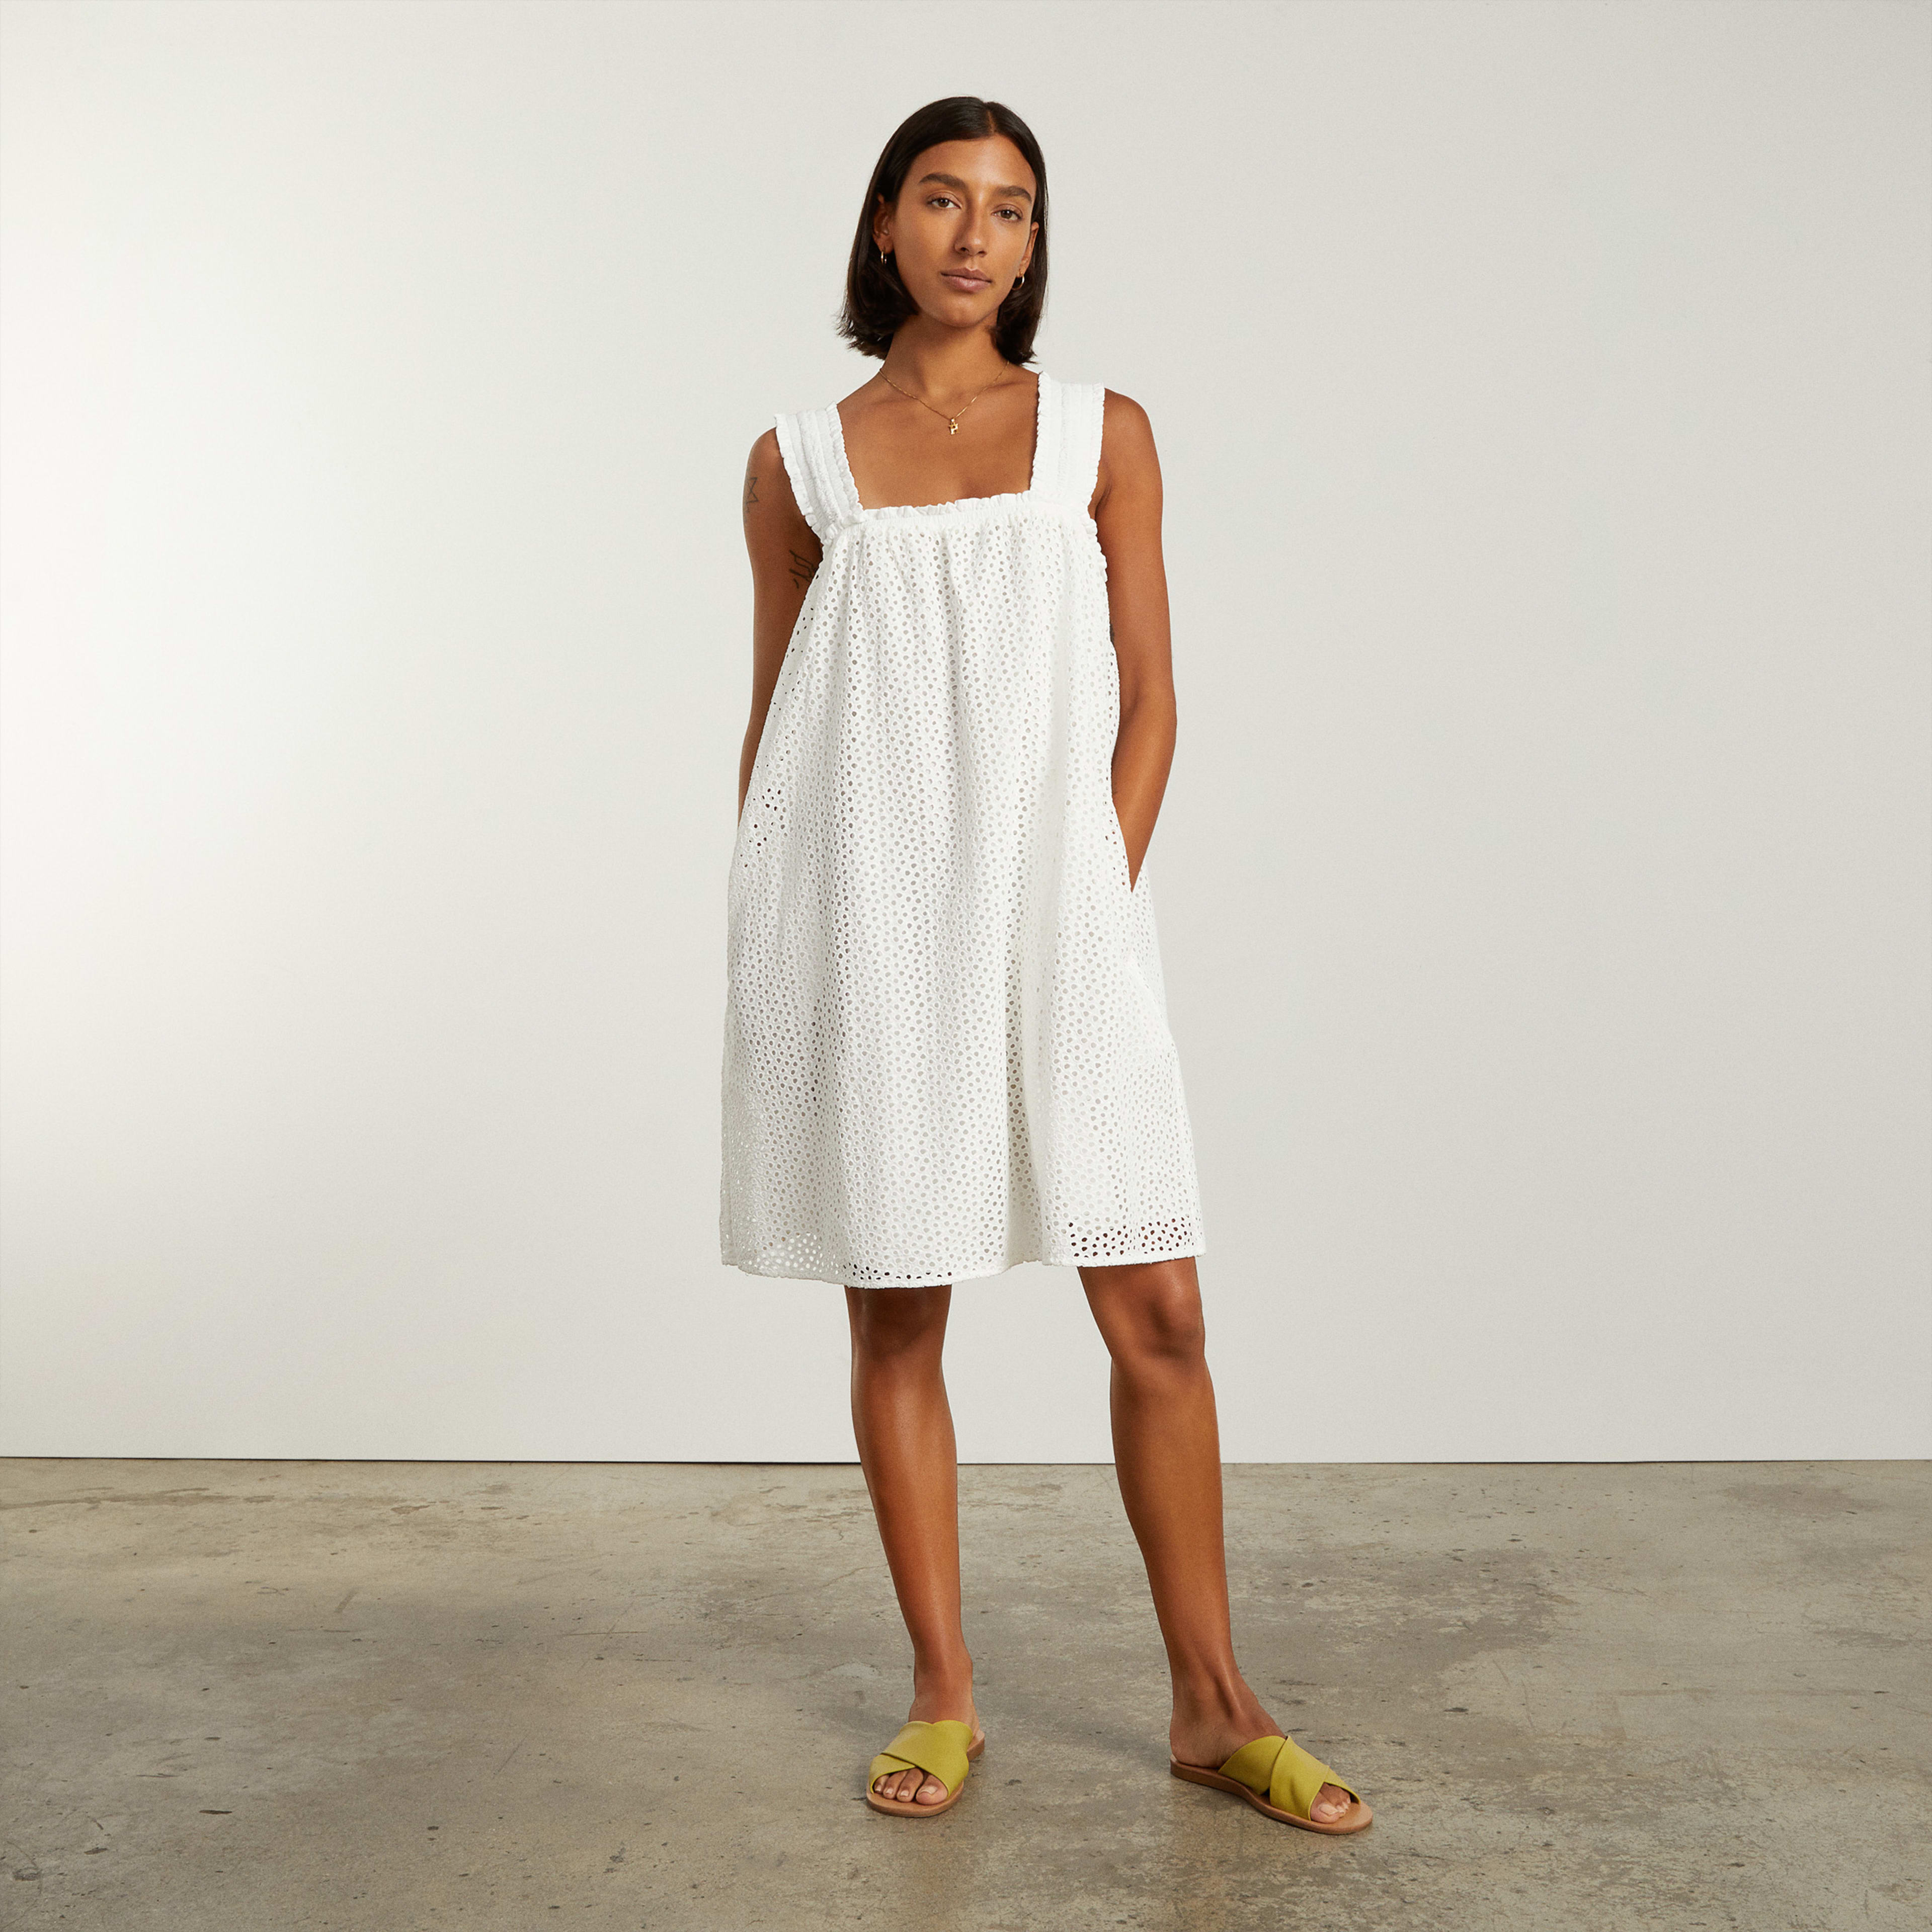 Women's Eyelet Smock Dress by Everlane in White, Size XS